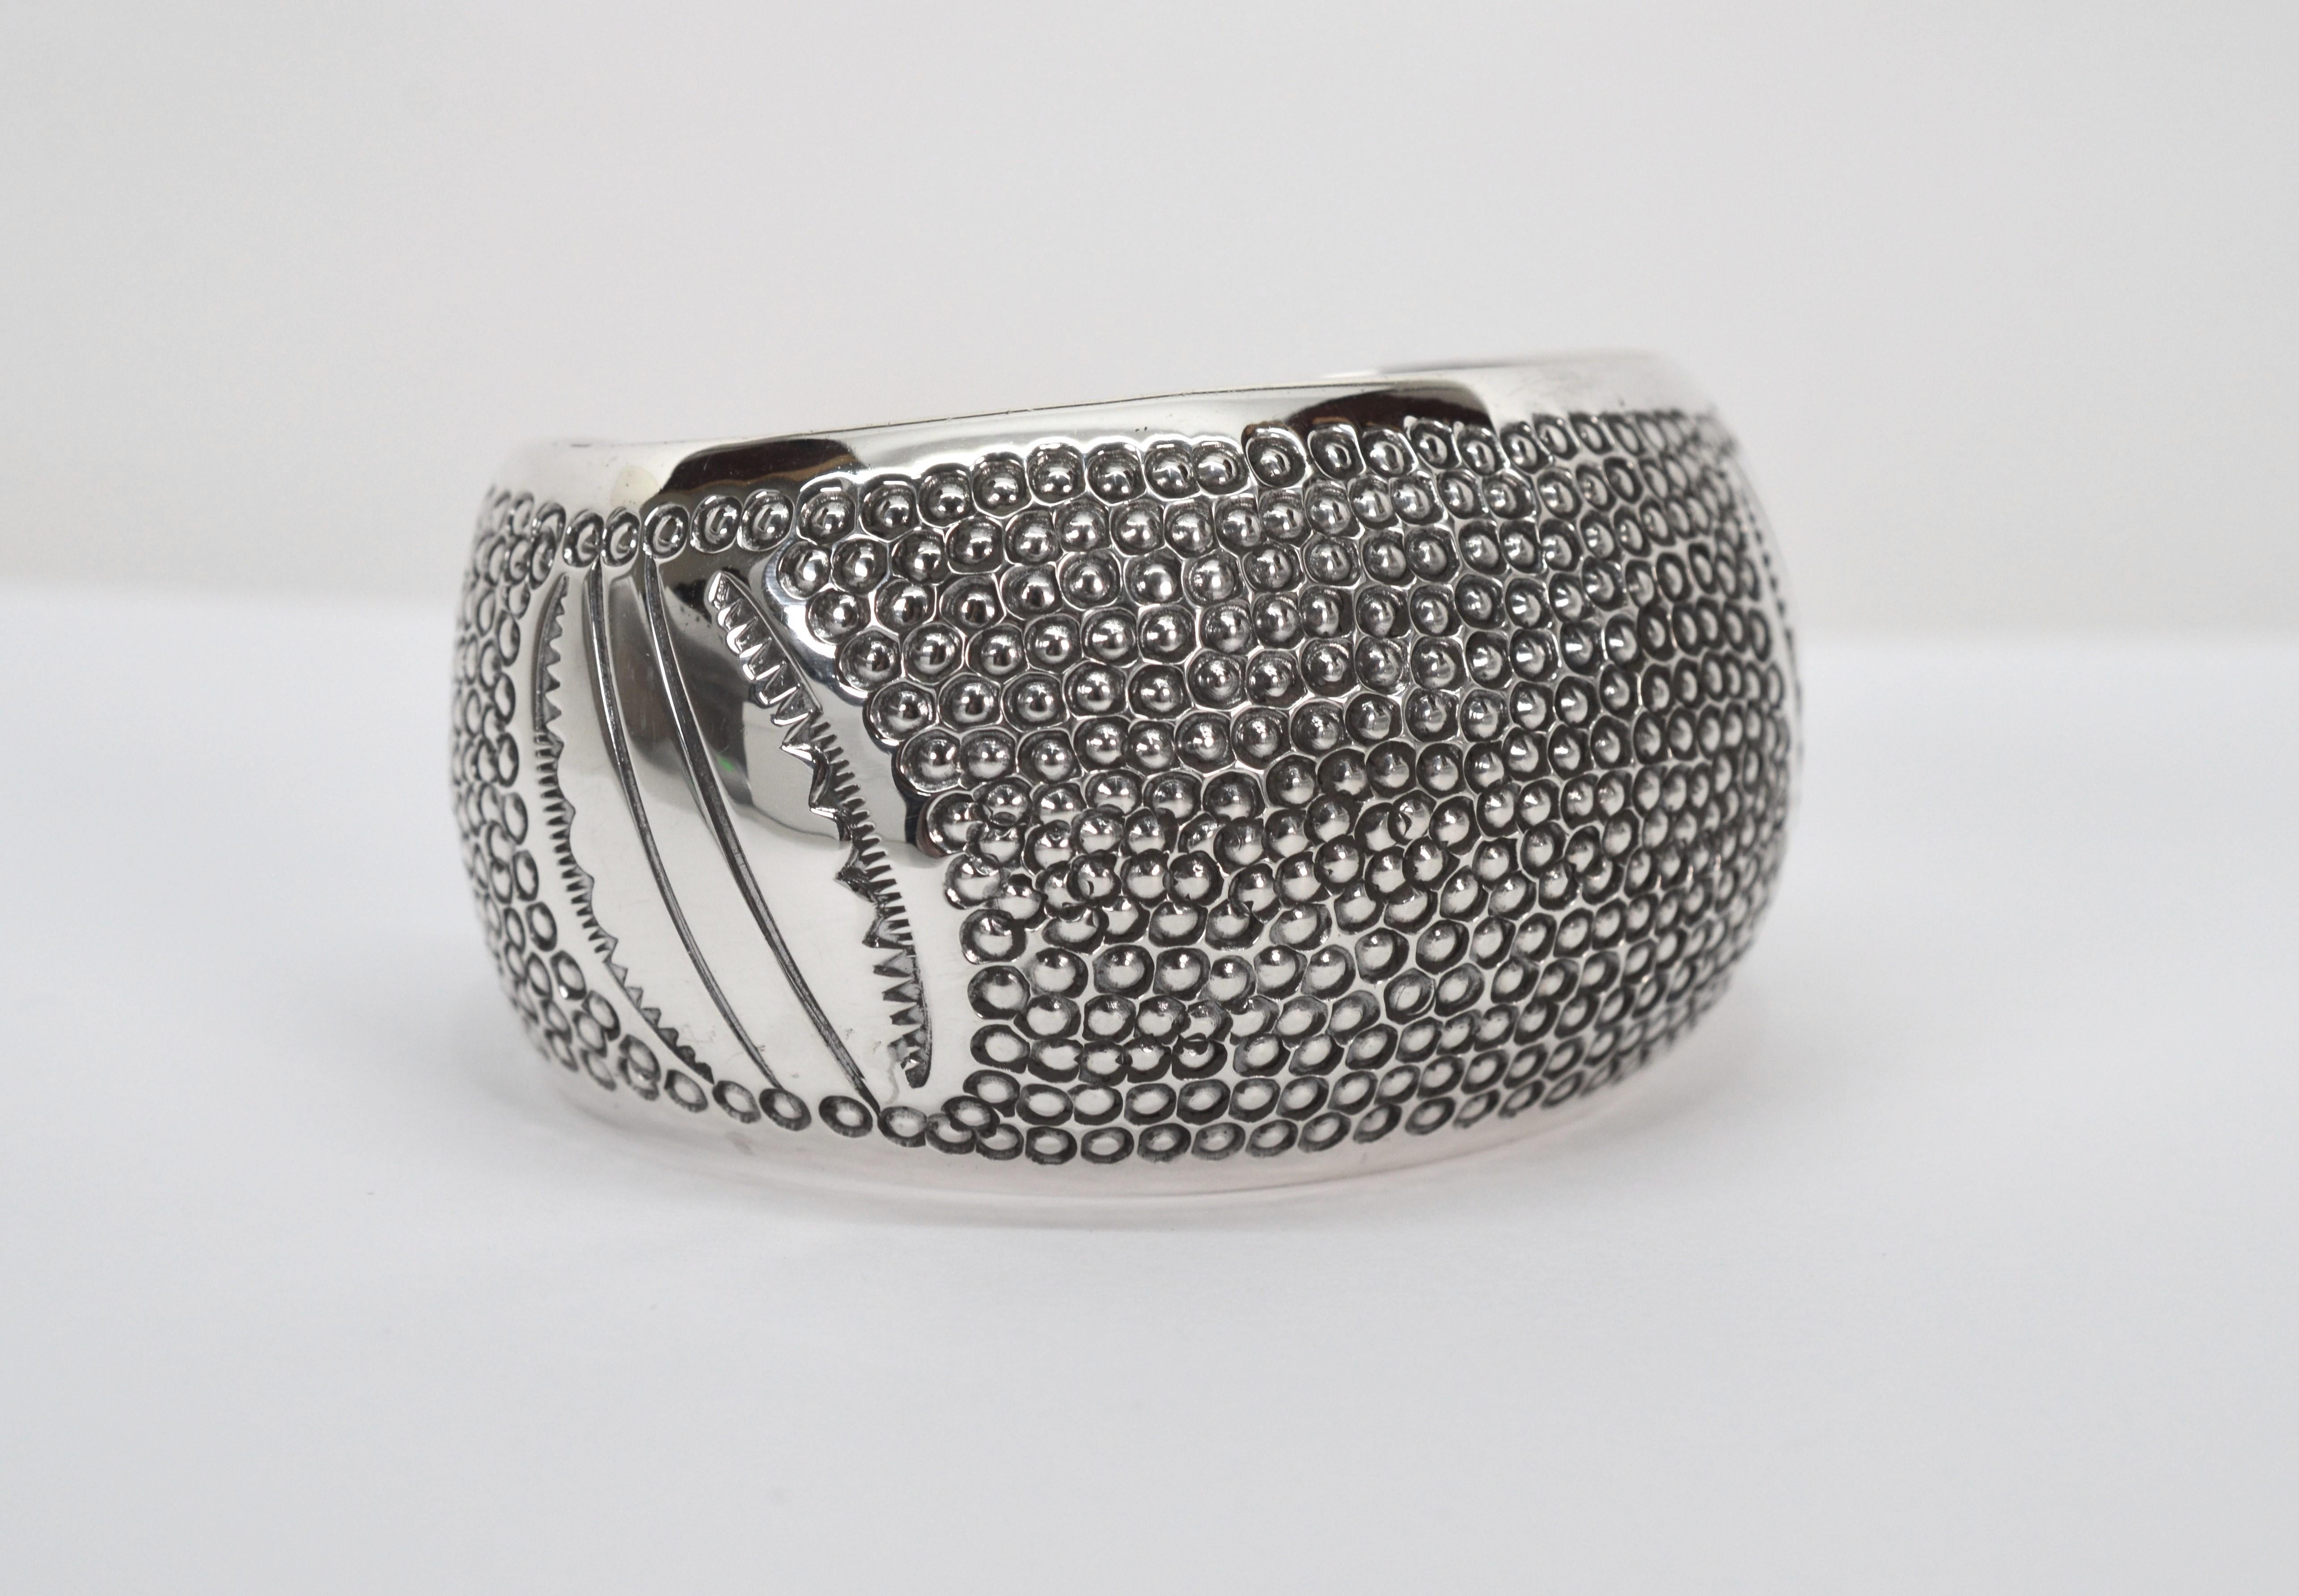 Timeless in sterling silver, this  Navajo cuff bracelet has a transitional design that is a complement to various styles and looks.  Impressive, this substantial hand polished domed cuff was created and signed by its known maker, Navajo master